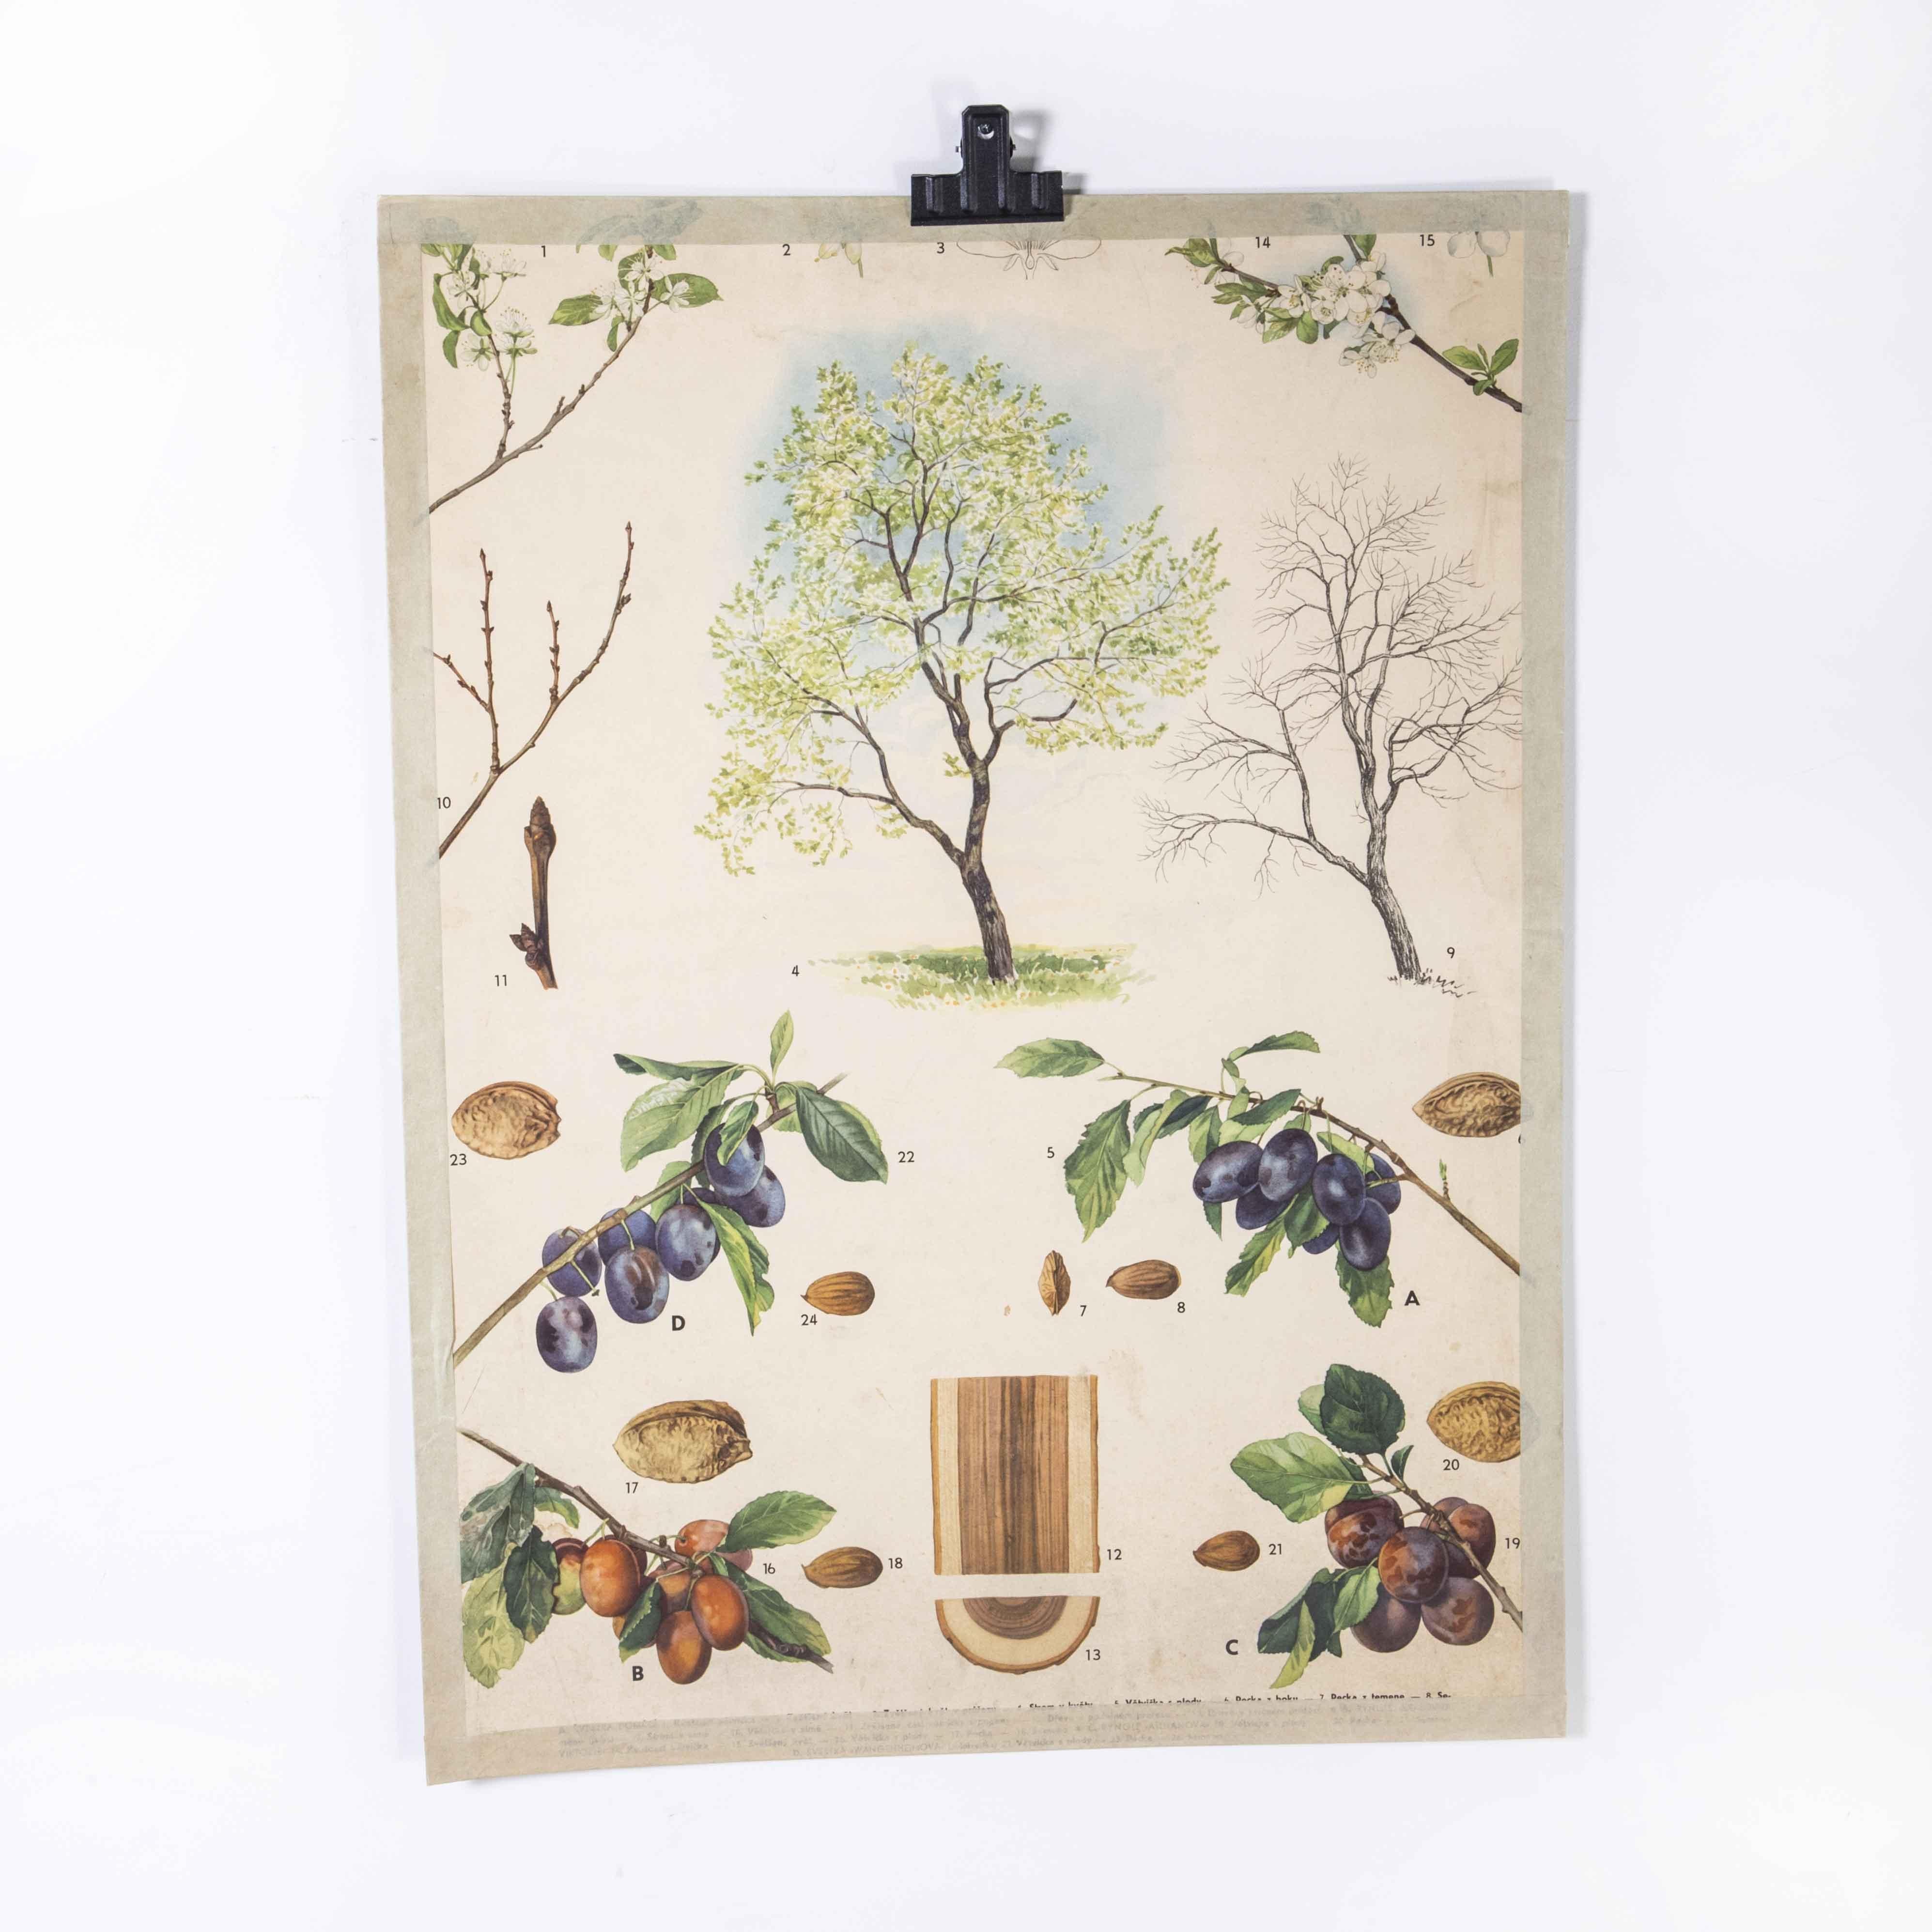 1950’s Grape Tree Educational Poster
1950’s Grape Tree Educational Poster. 20th century Czechoslovakian educational chart. A rare and vintage wall chart from the Czech Republic illustrating how grapes grow. This heavyweight paper poster is in